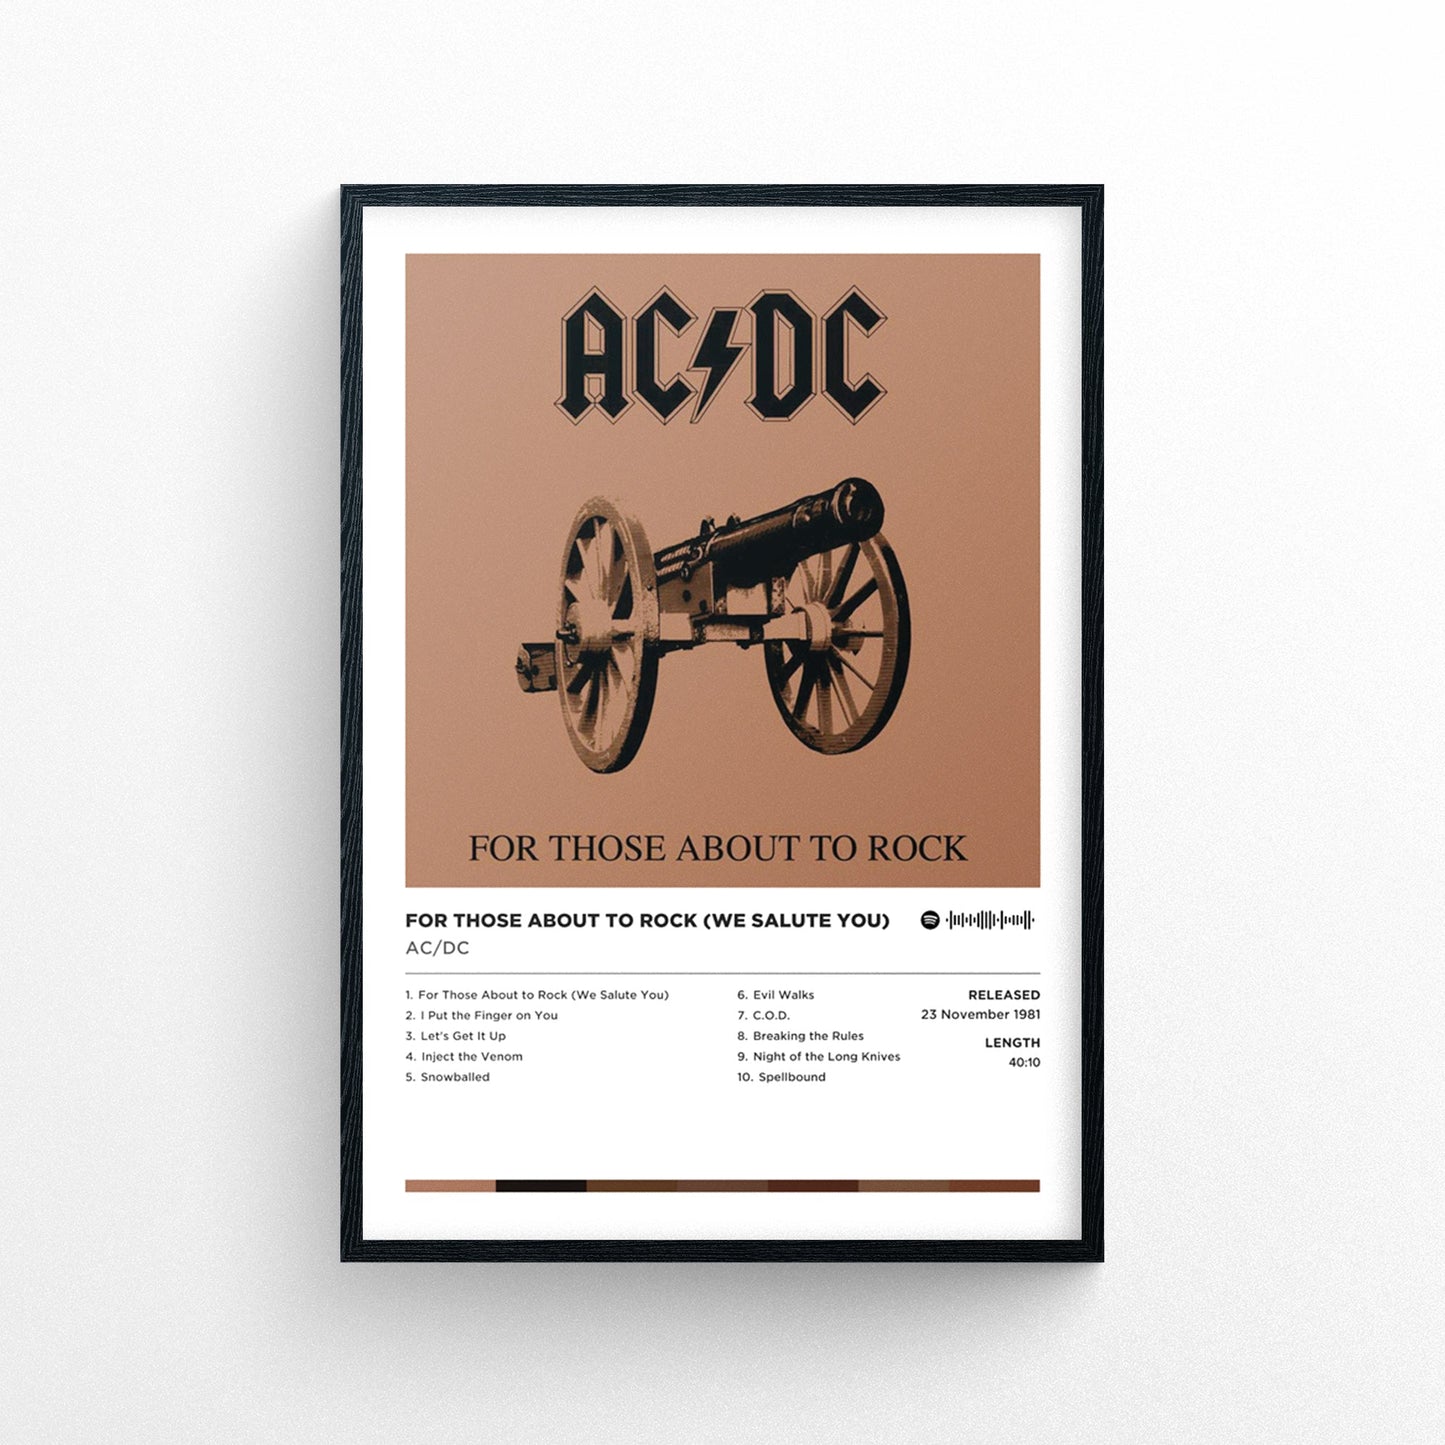 ACDC - for Those About to Rock (We Salute You) Poster Print | Framed Options | Album Cover Artwork